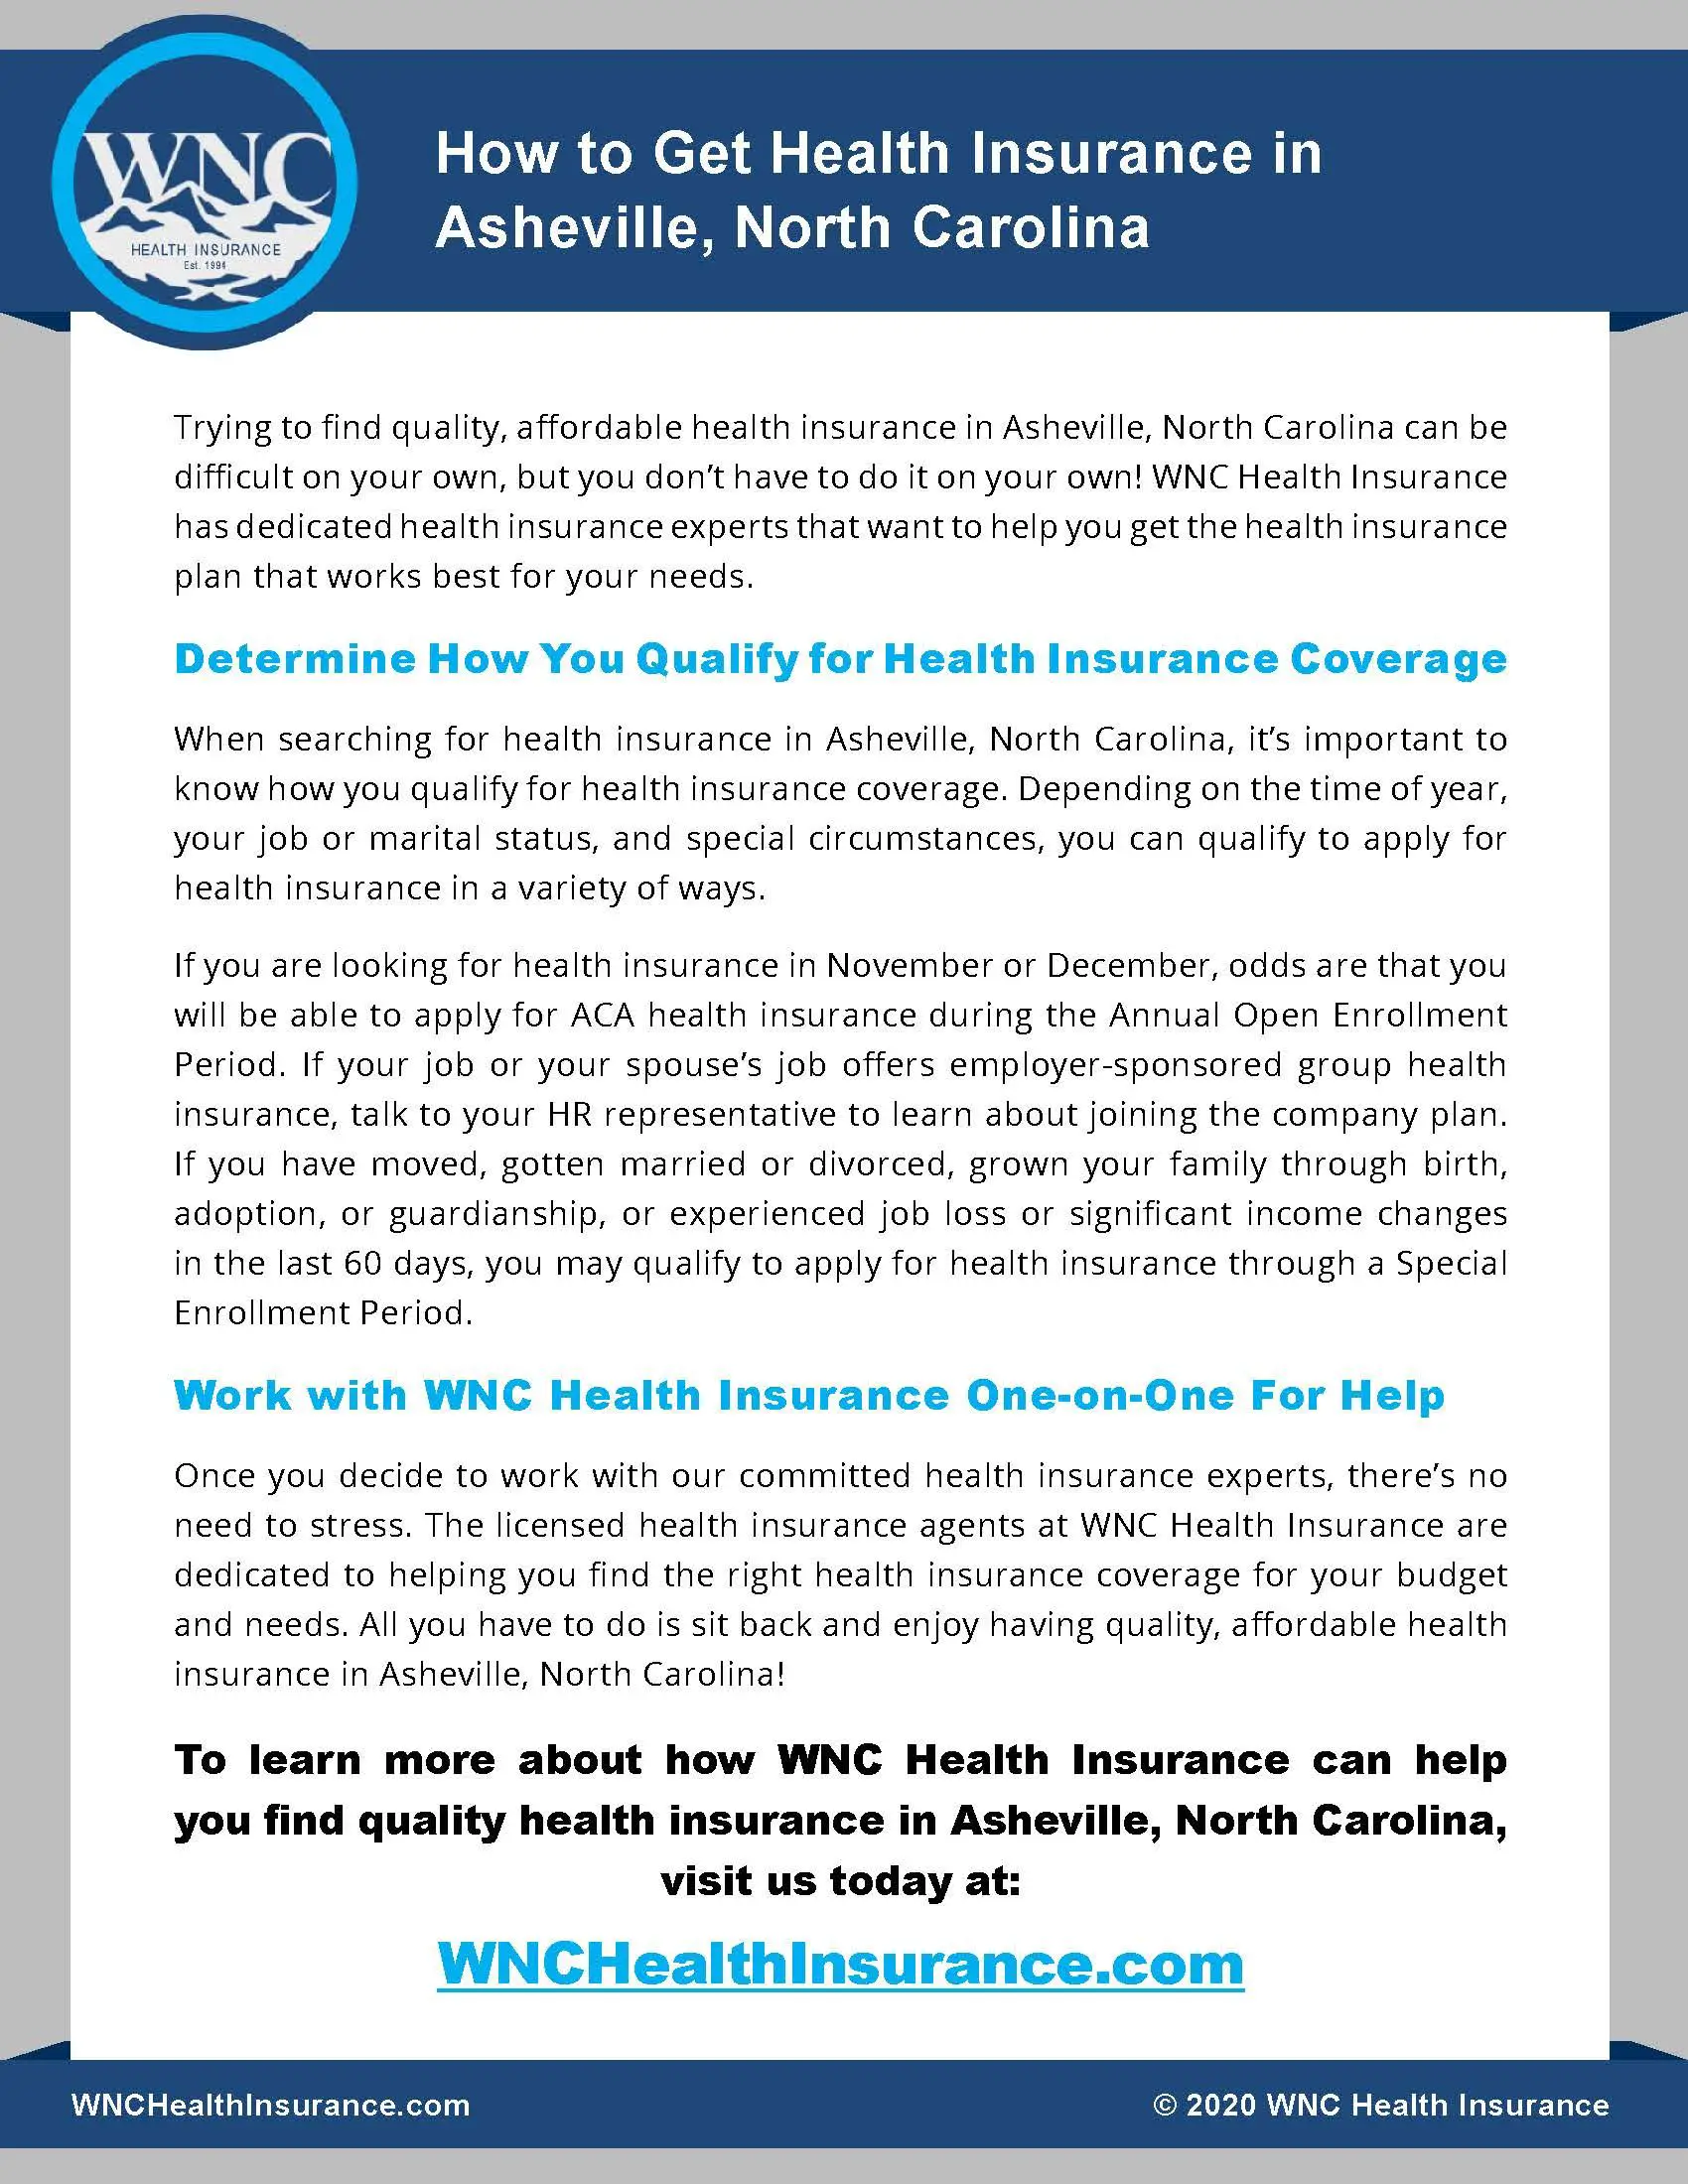 How to Get Health Insurance in Asheville, North Carolina in 2020 ...